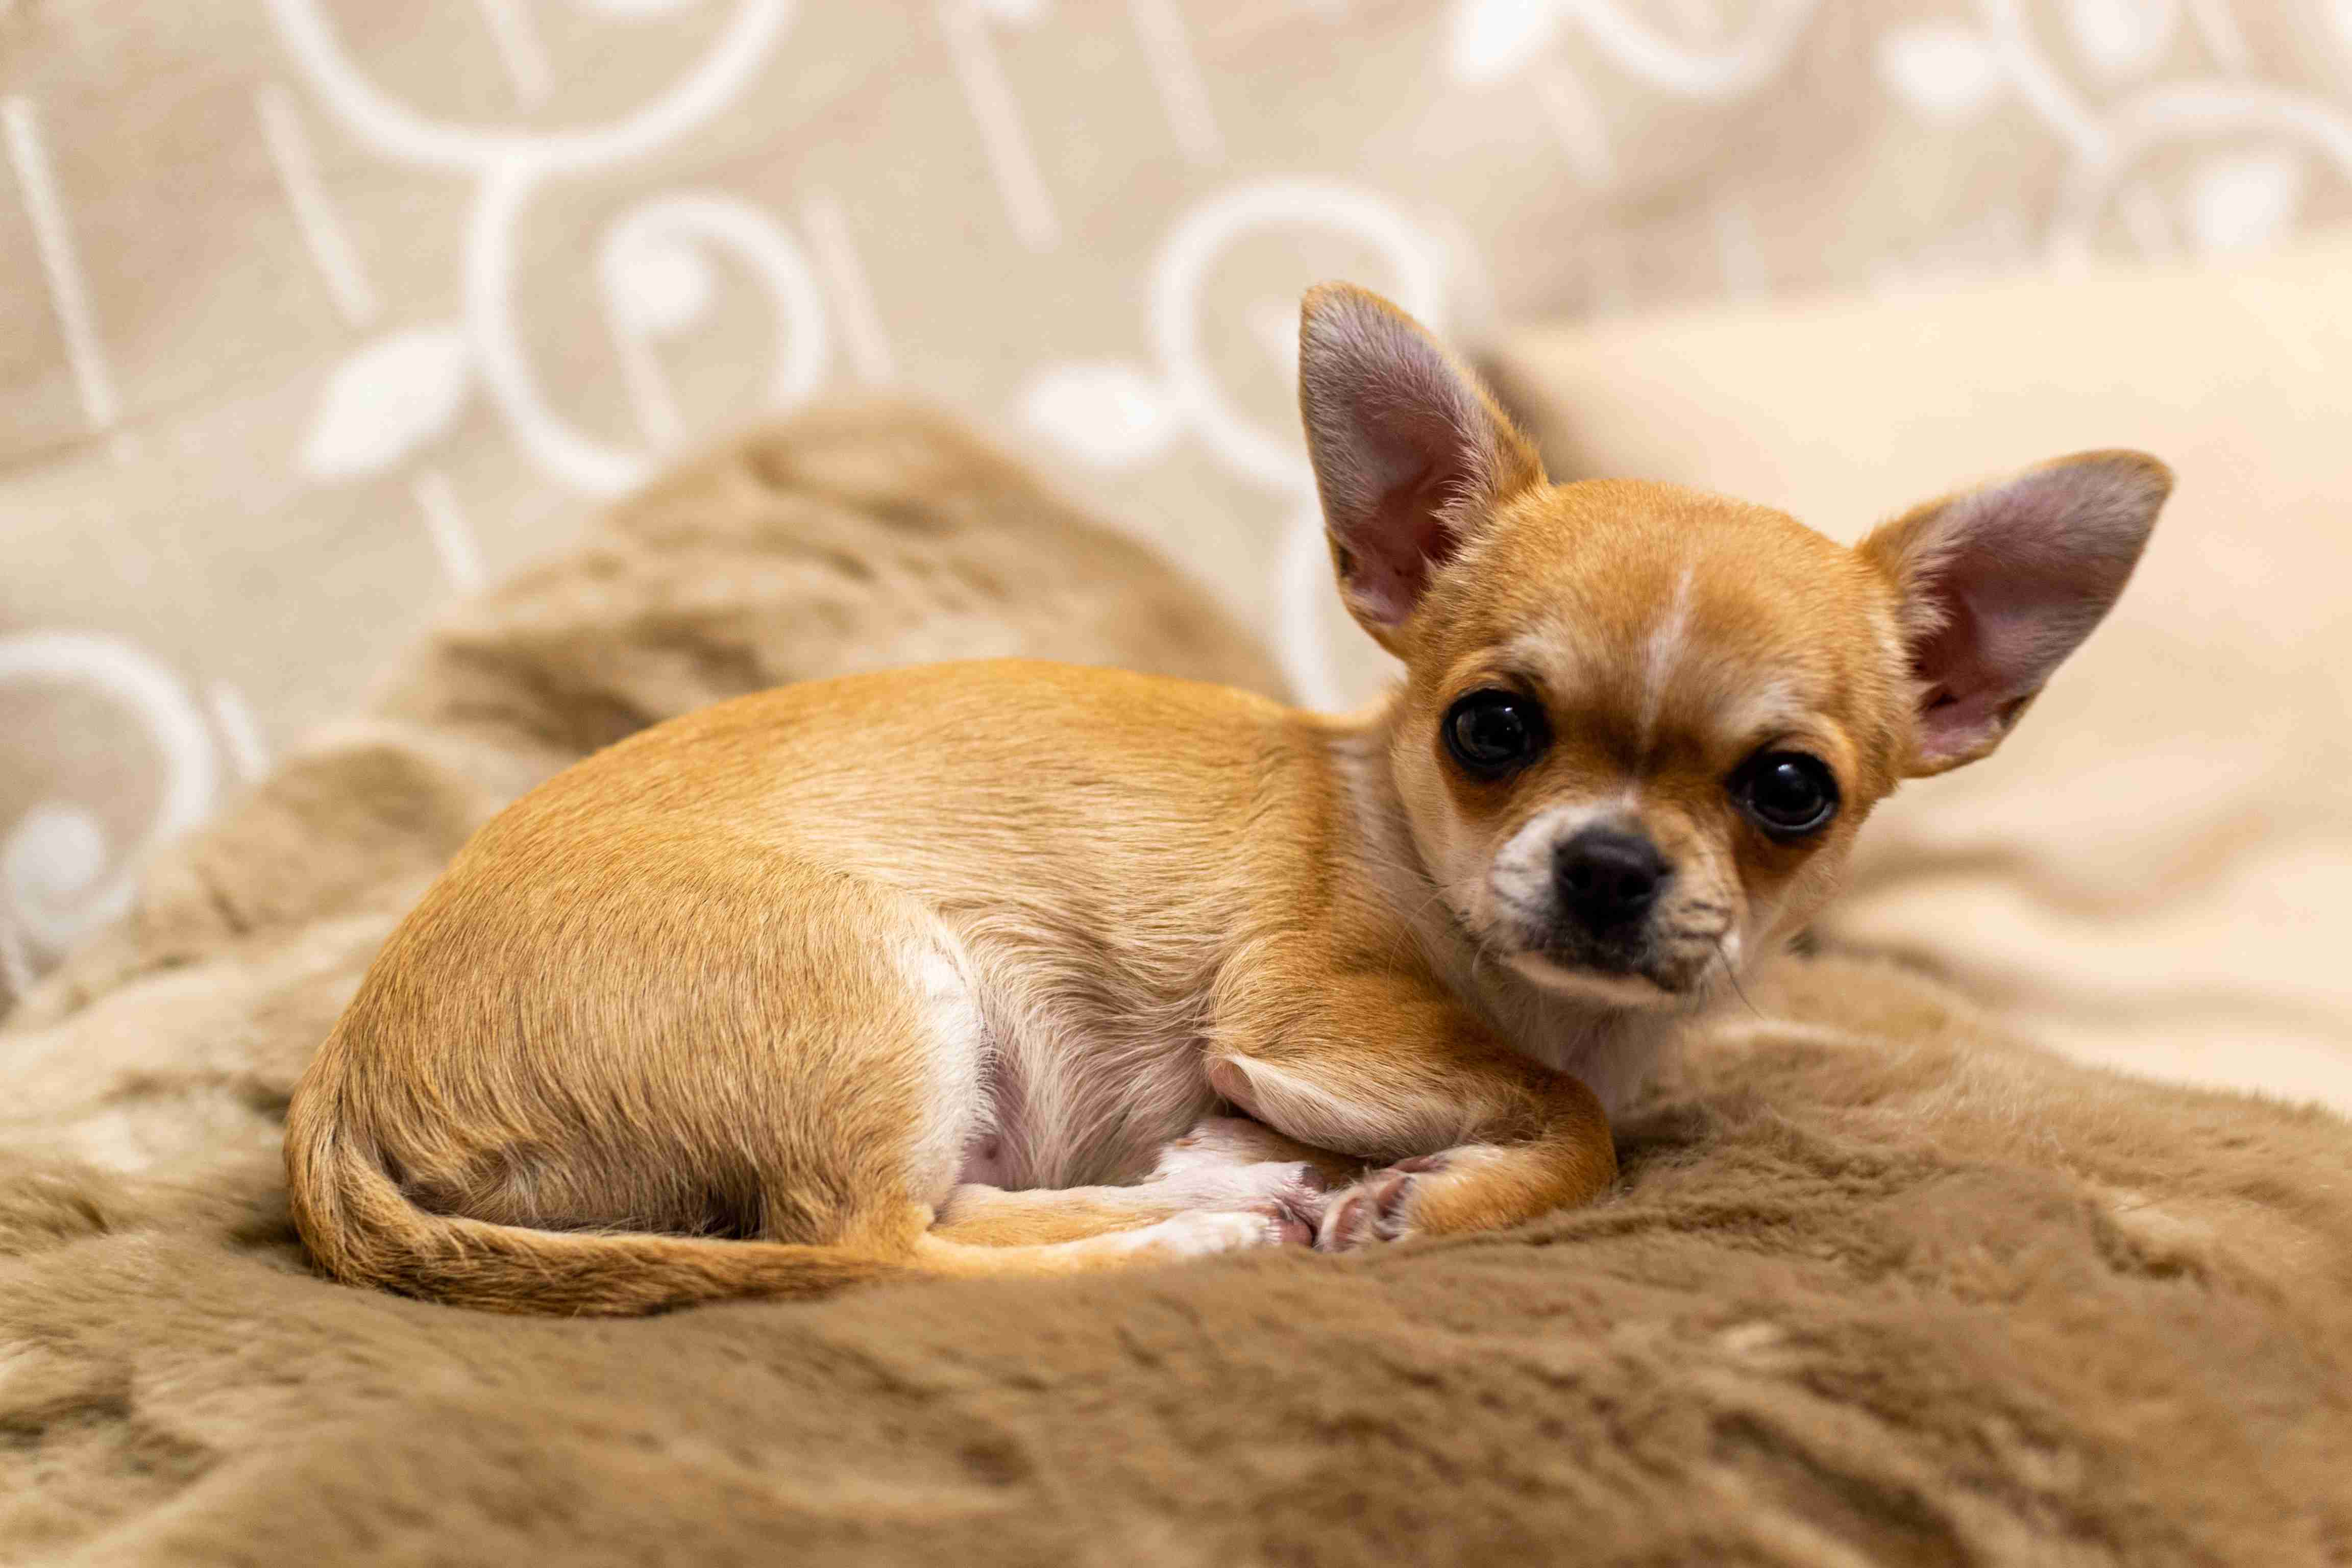 Can medication be used to manage a Chihuahua's anger issues?